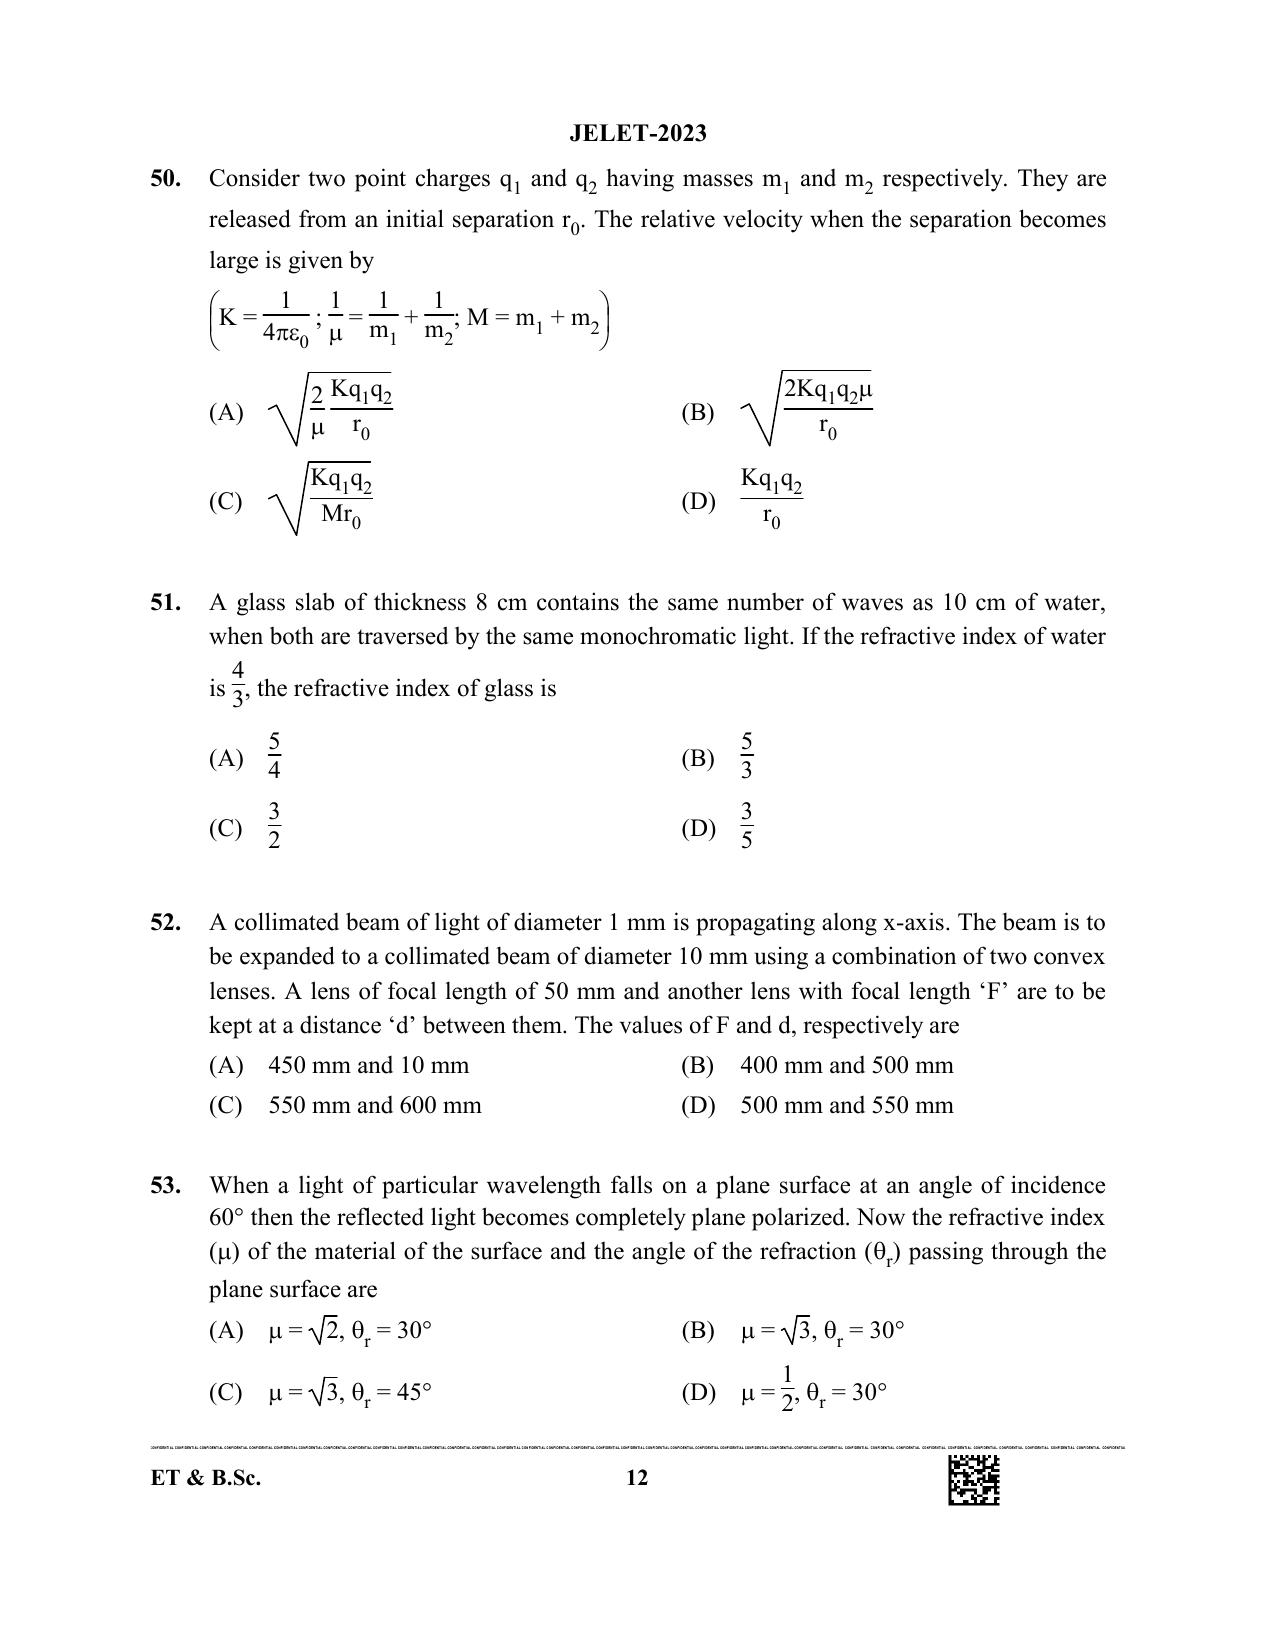 WBJEE JELET 2023 Paper I (ET & BSC) Question Papers - Page 12